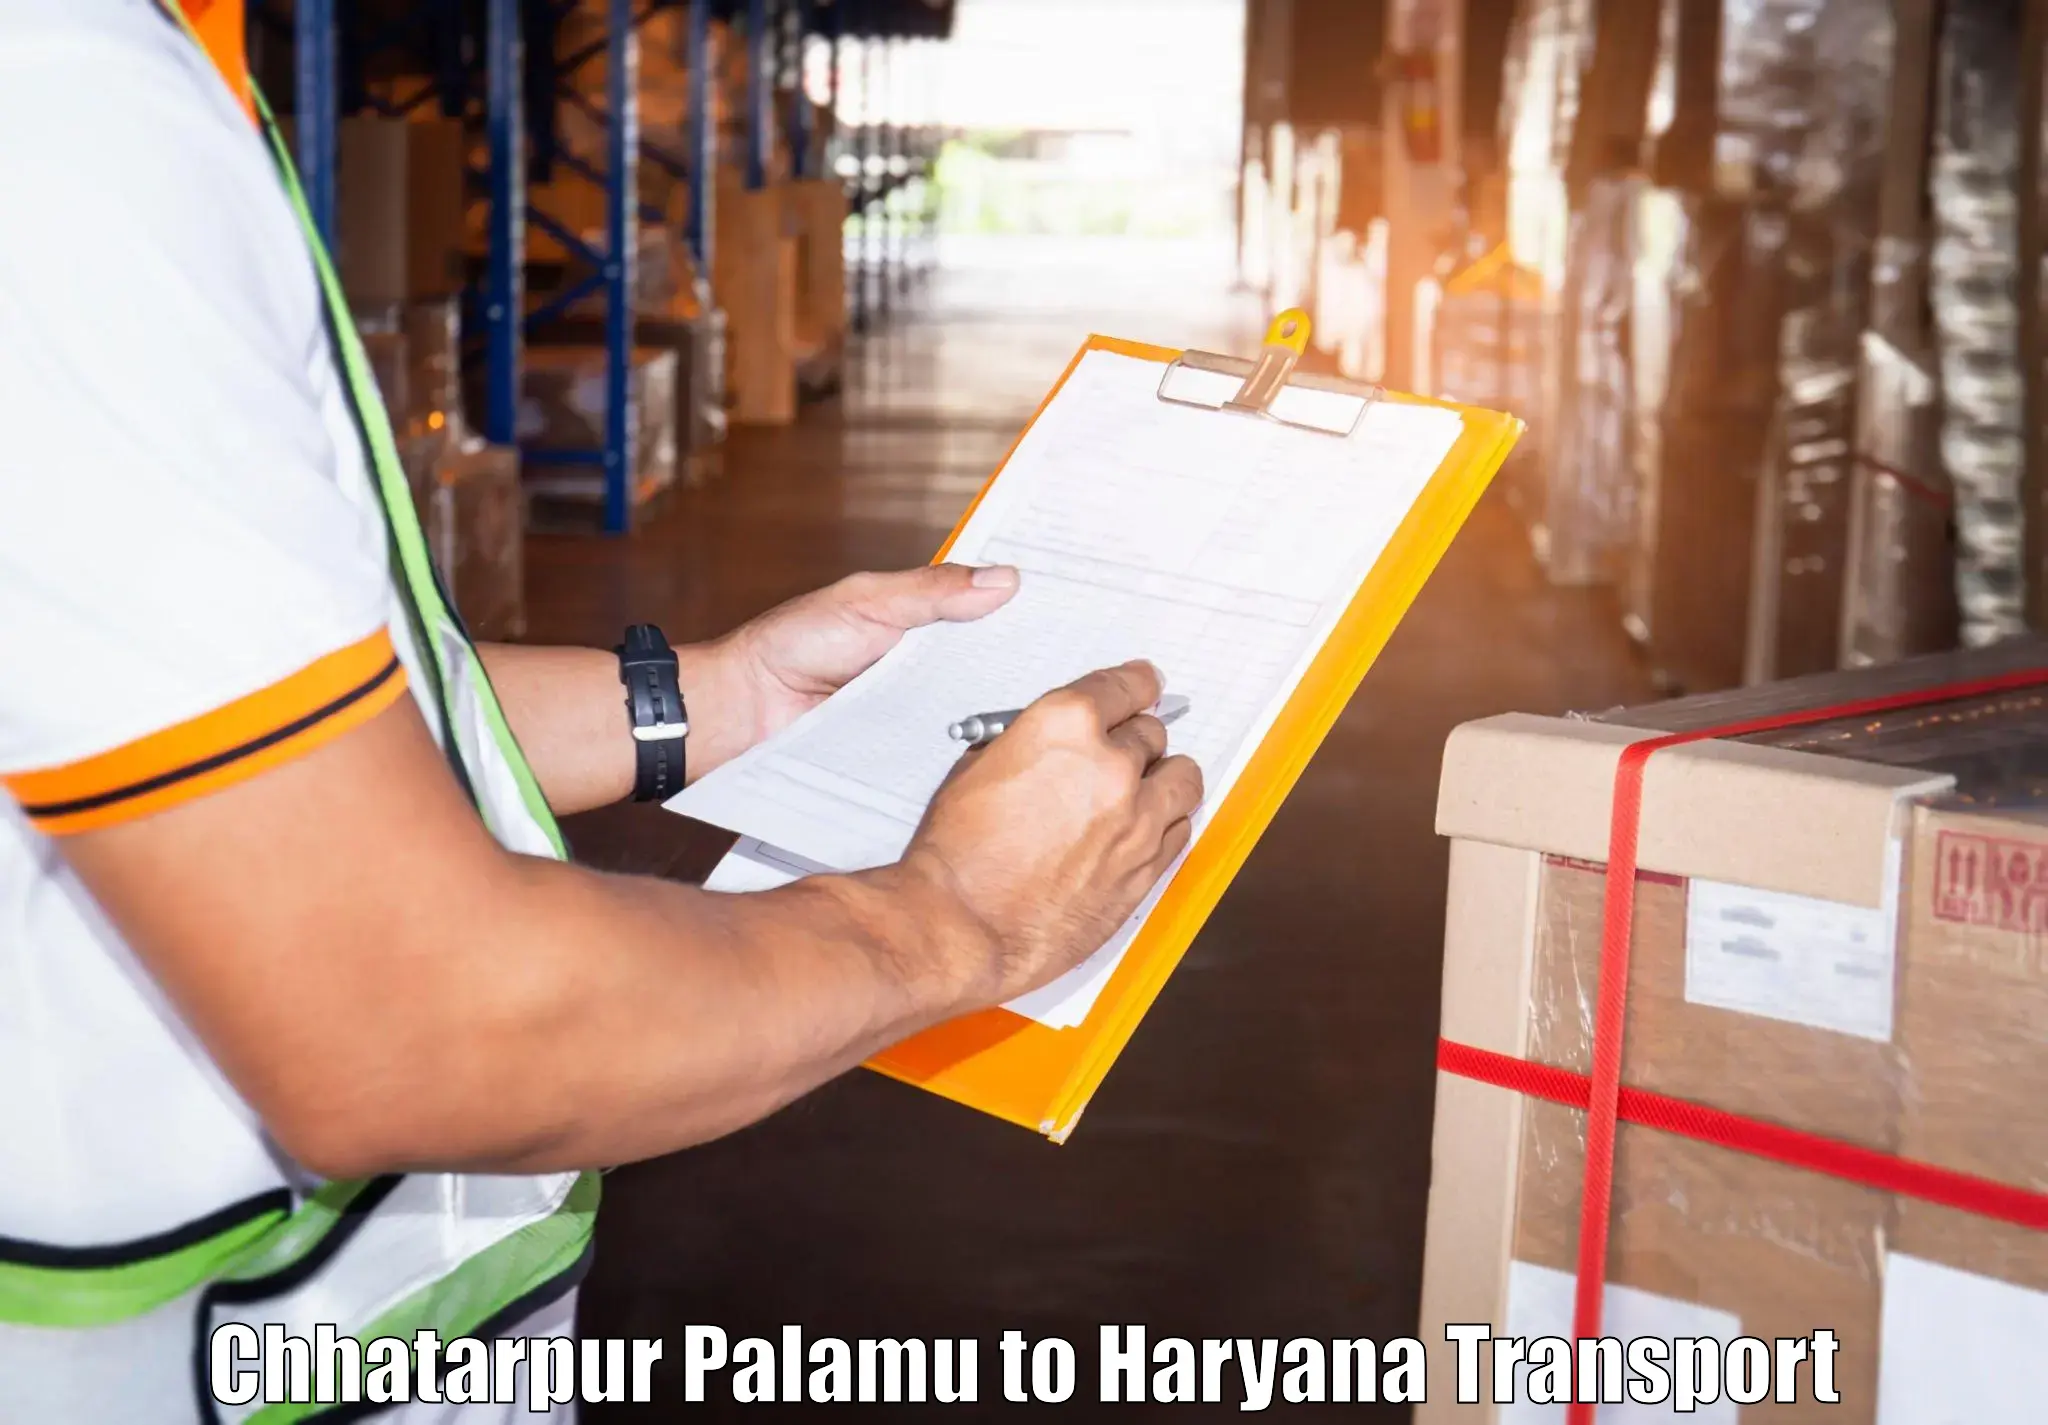 Container transportation services in Chhatarpur Palamu to Mahendragarh